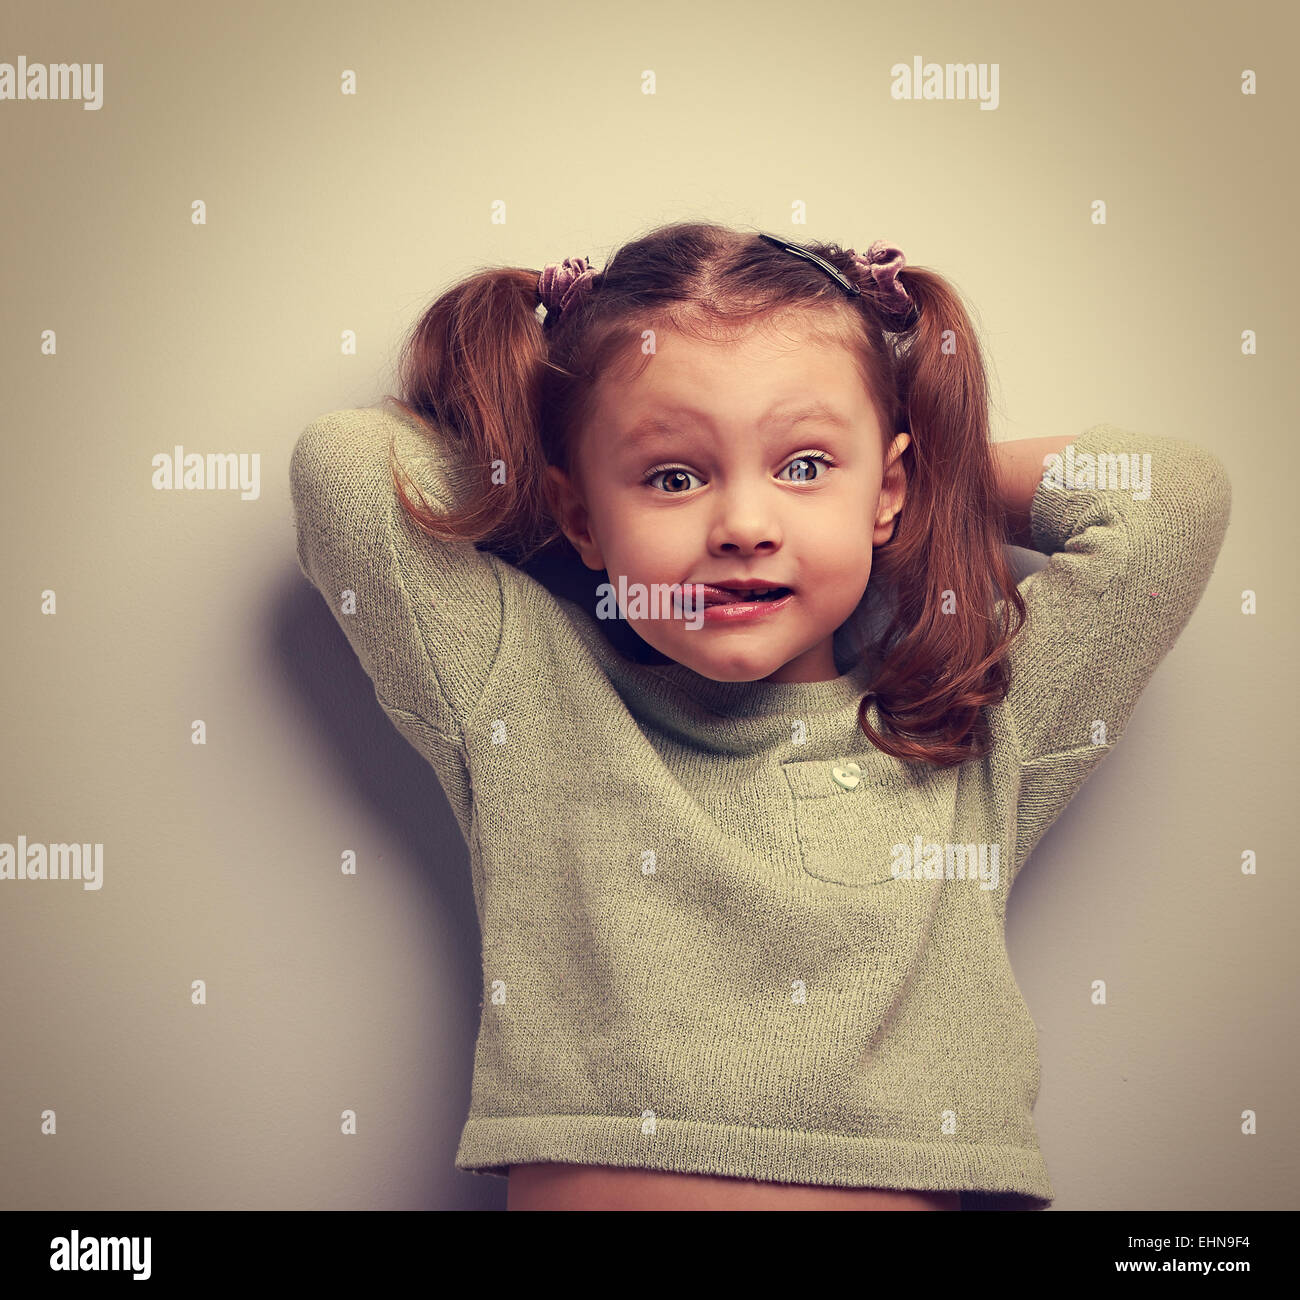 Funny girl showing tongue and making surprising fun face. Vintage portrait Stock Photo